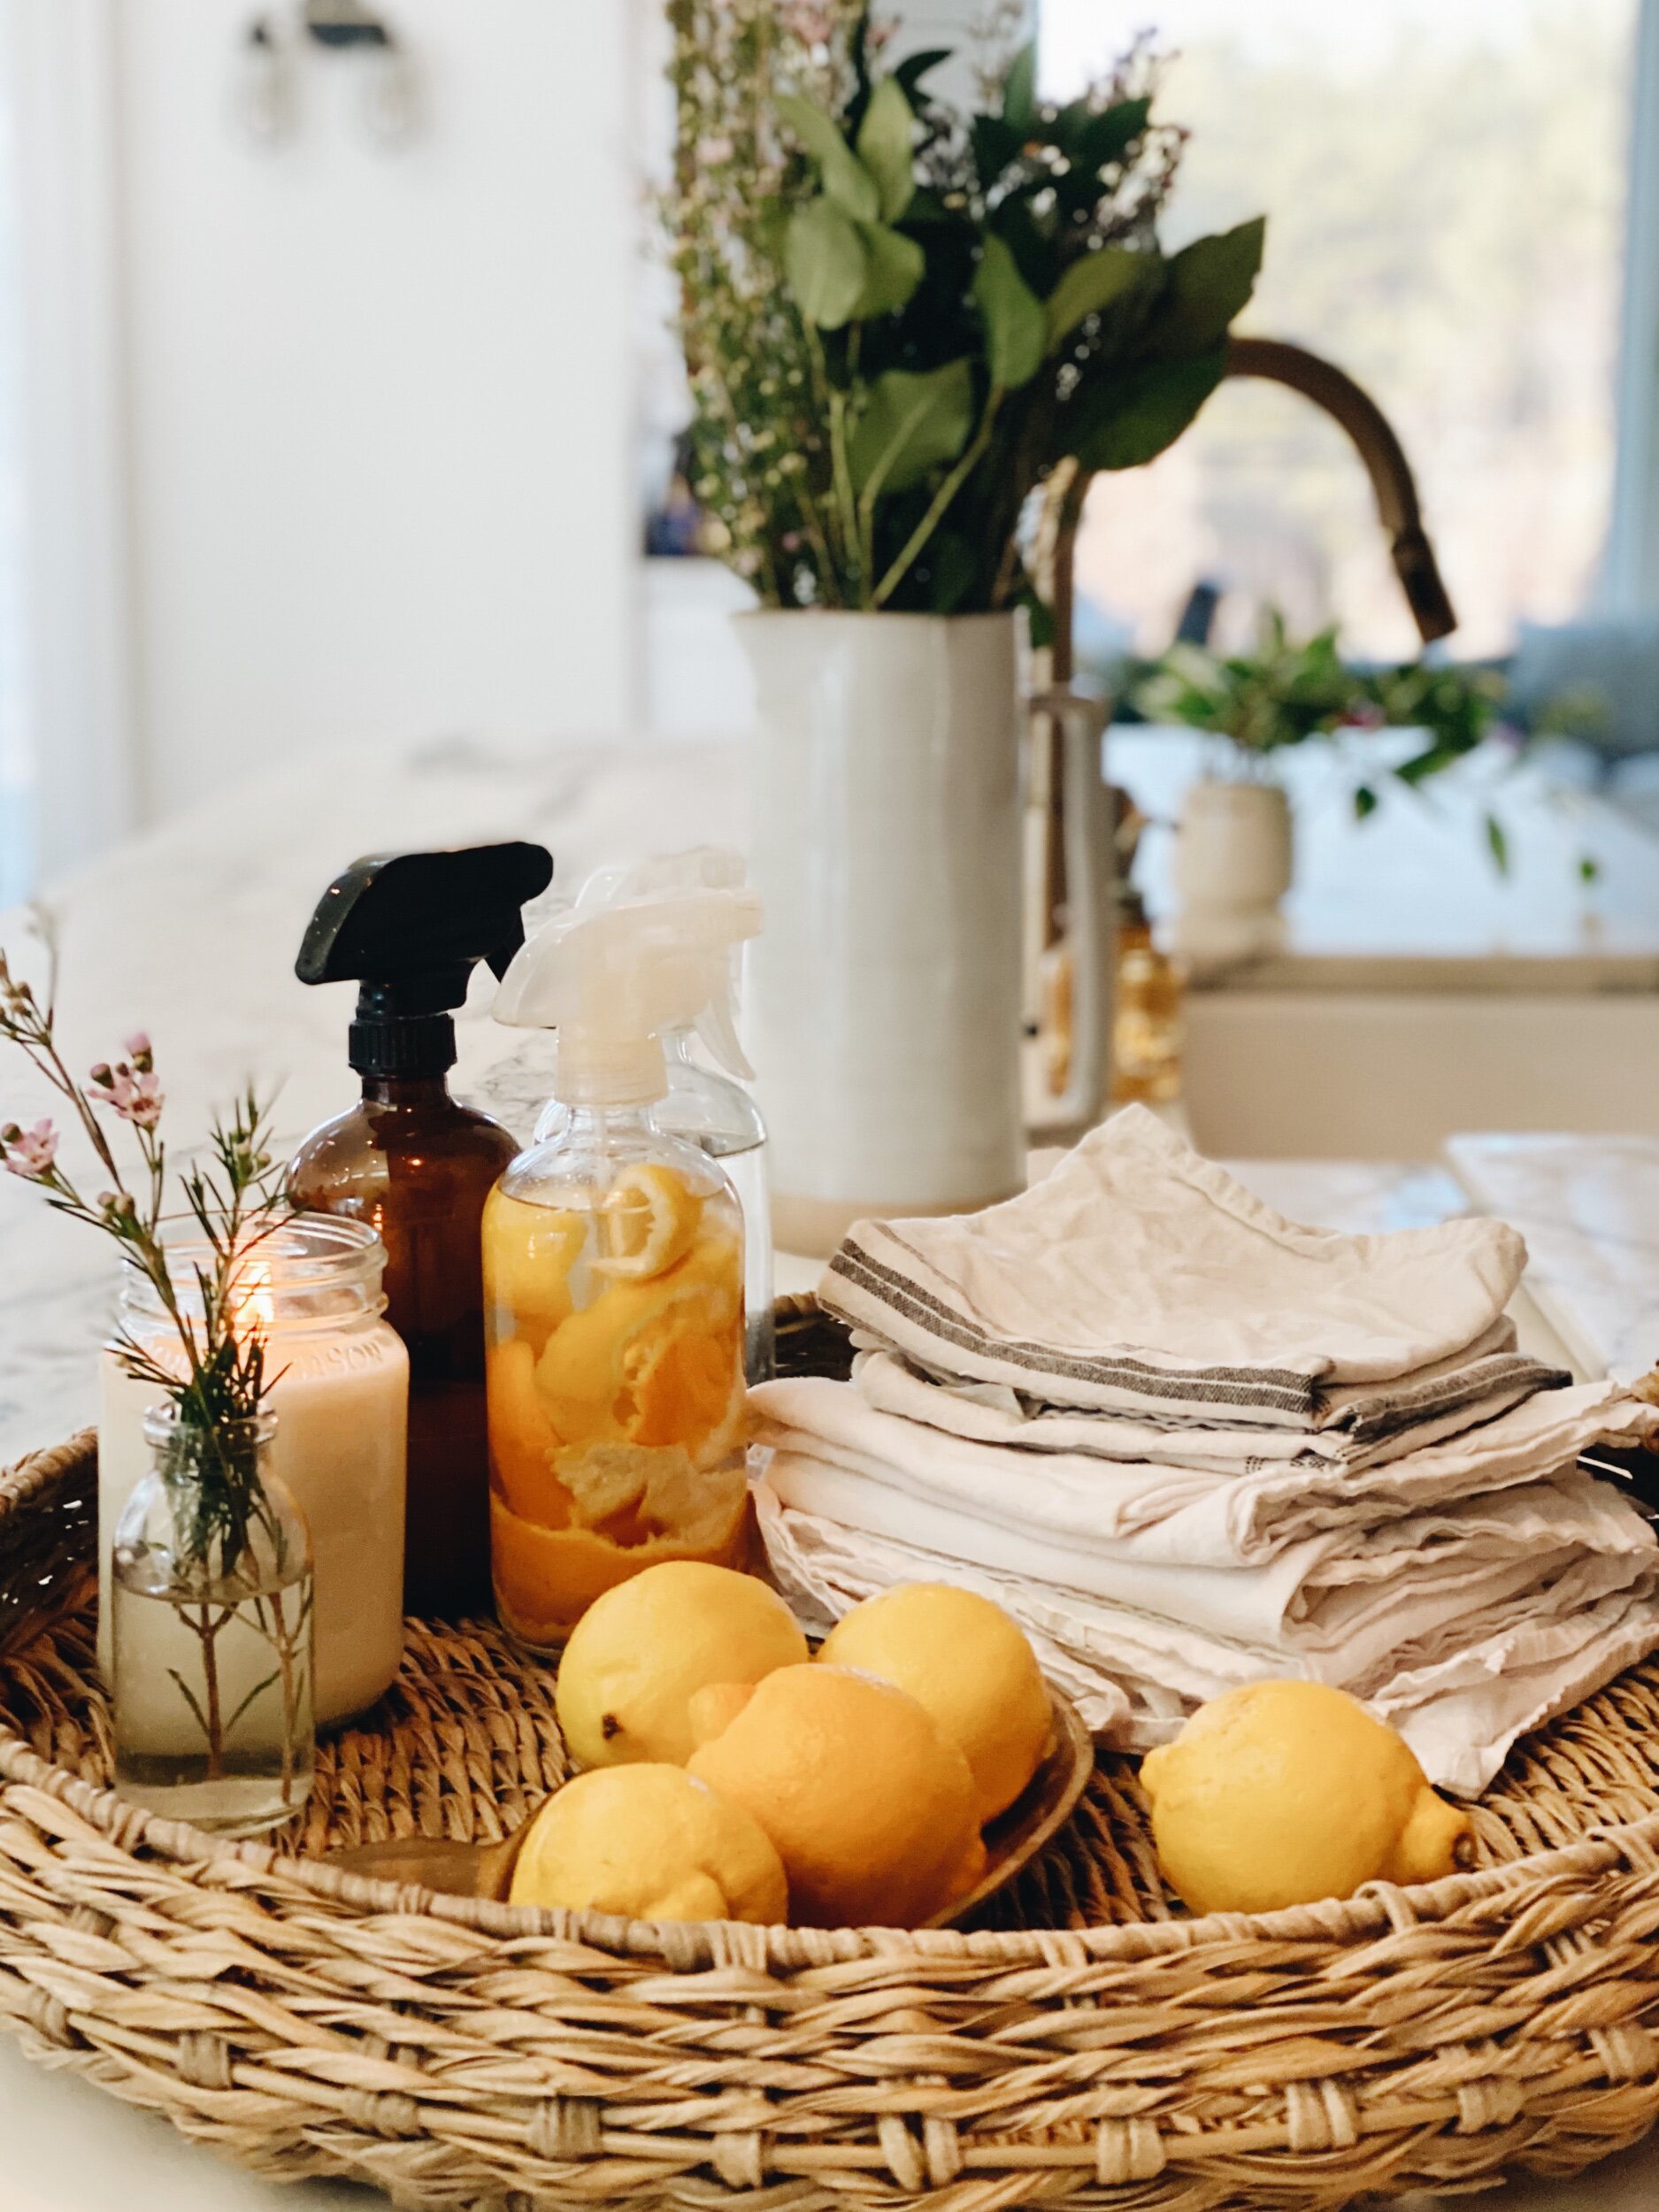 All-Natural DIY Bathroom Cleaner - The House & Homestead